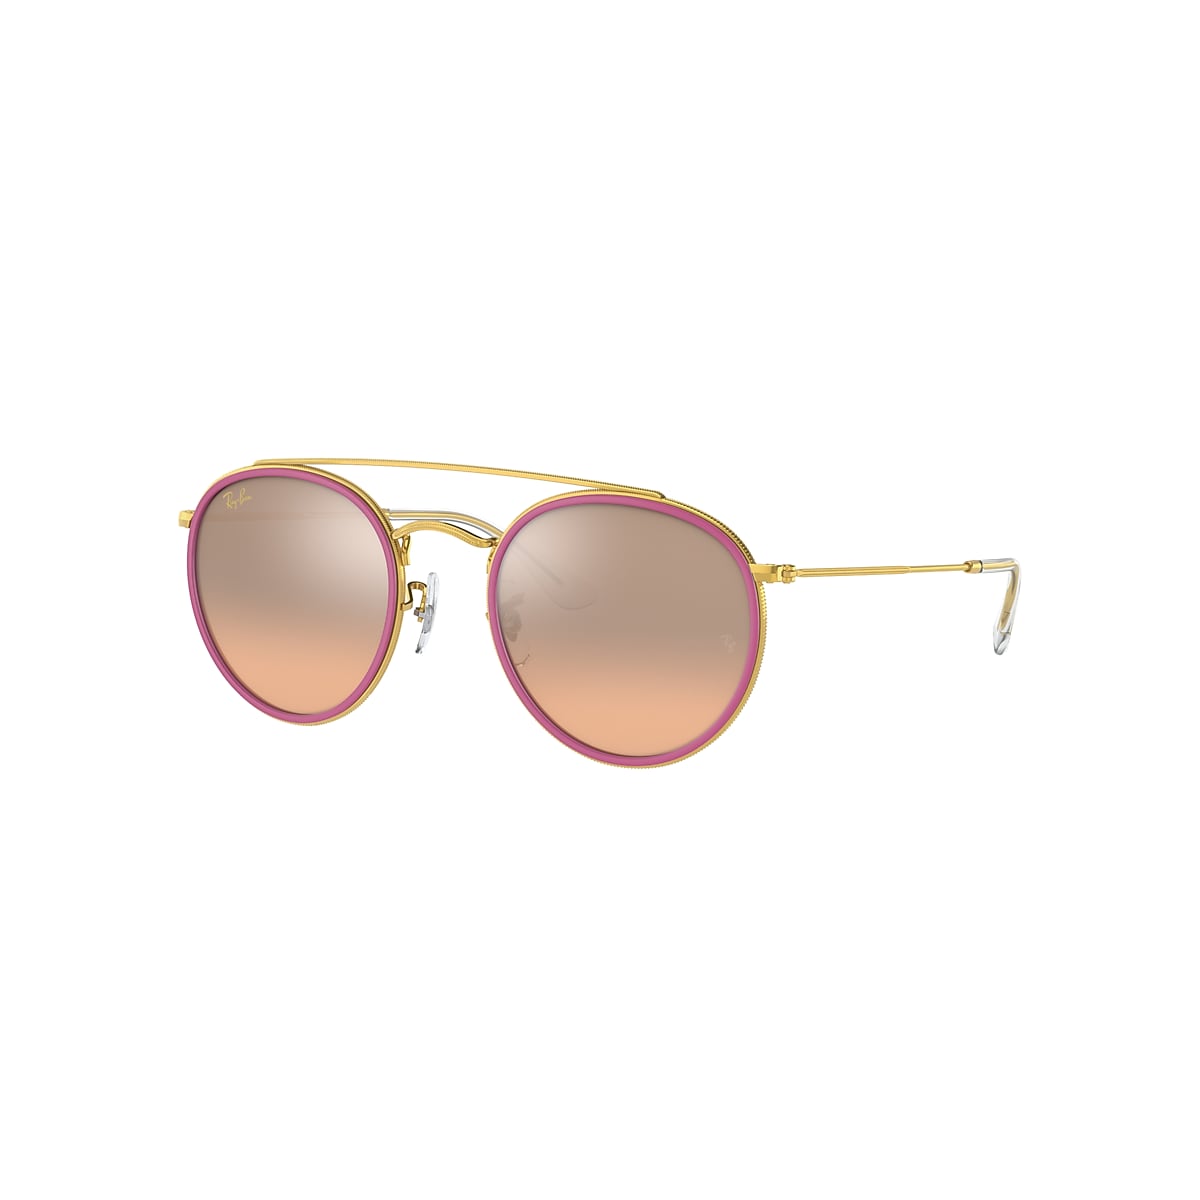 ROUND DOUBLE BRIDGE Sunglasses in Gold and Silver - RB3647N | Ray 